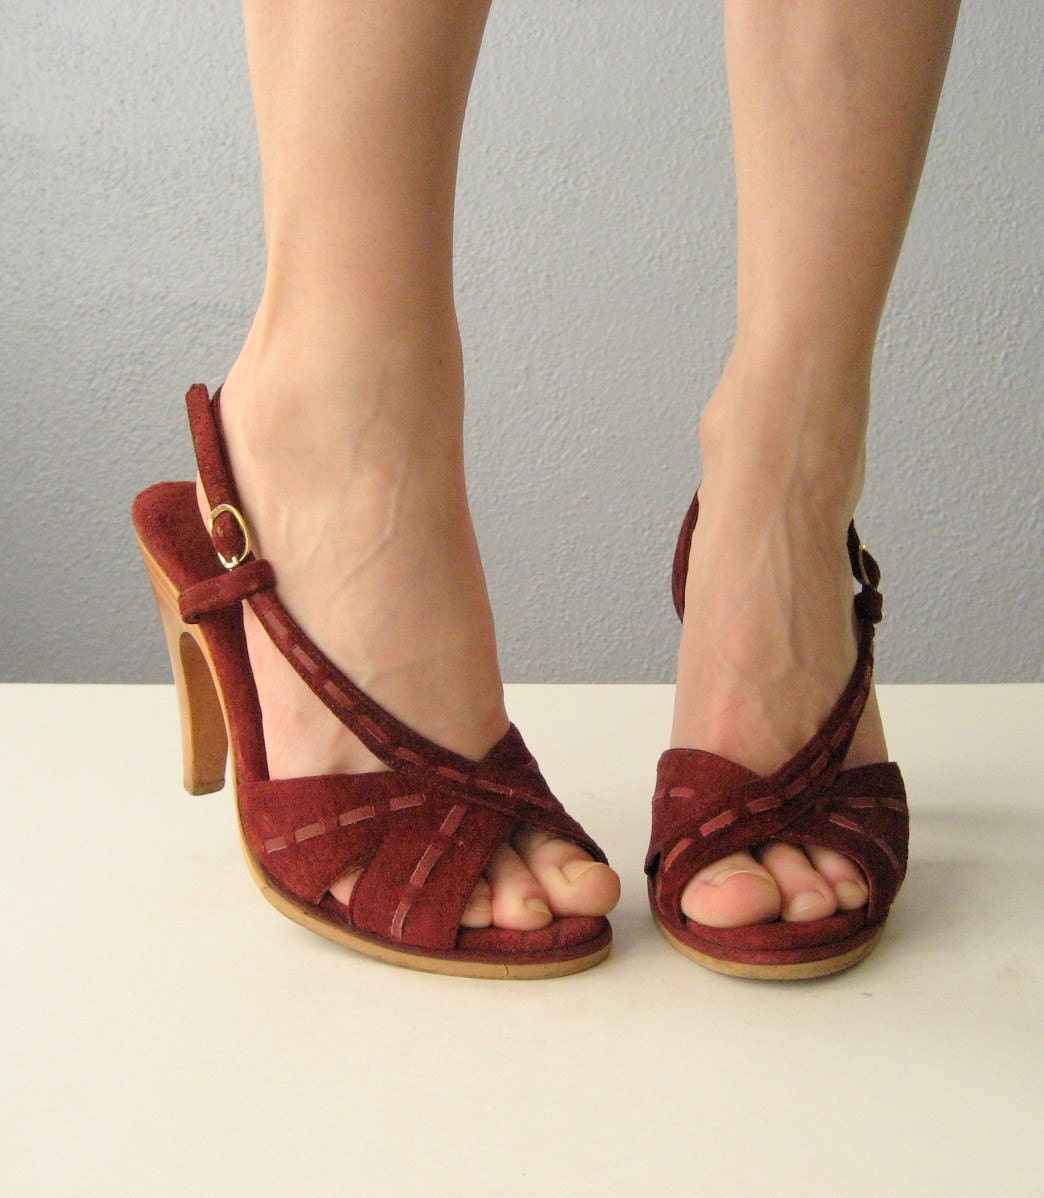 cranberry suede and wood stacked heels size 6 1/2